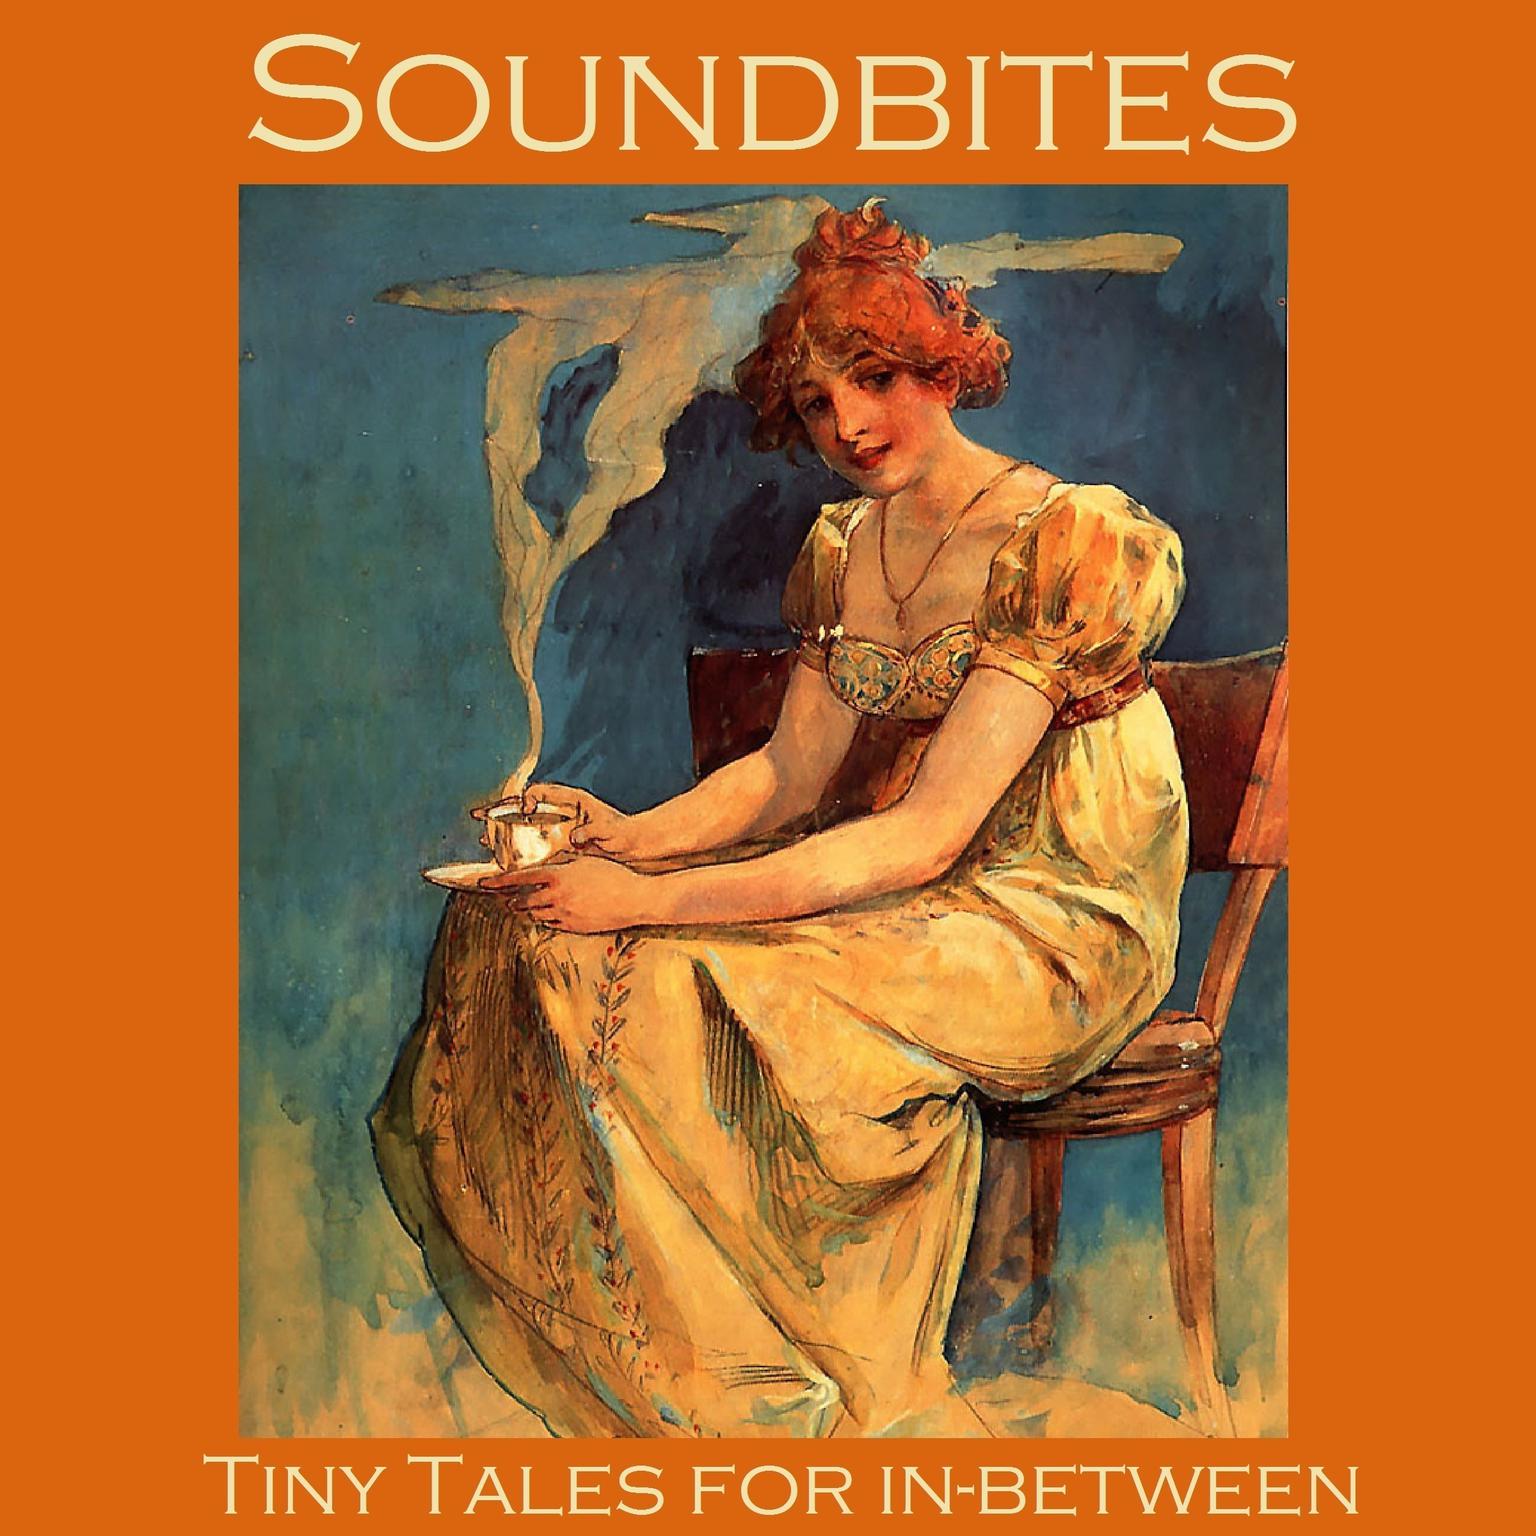 Soundbites: Tiny Tales for In-Between Audiobook, by various authors